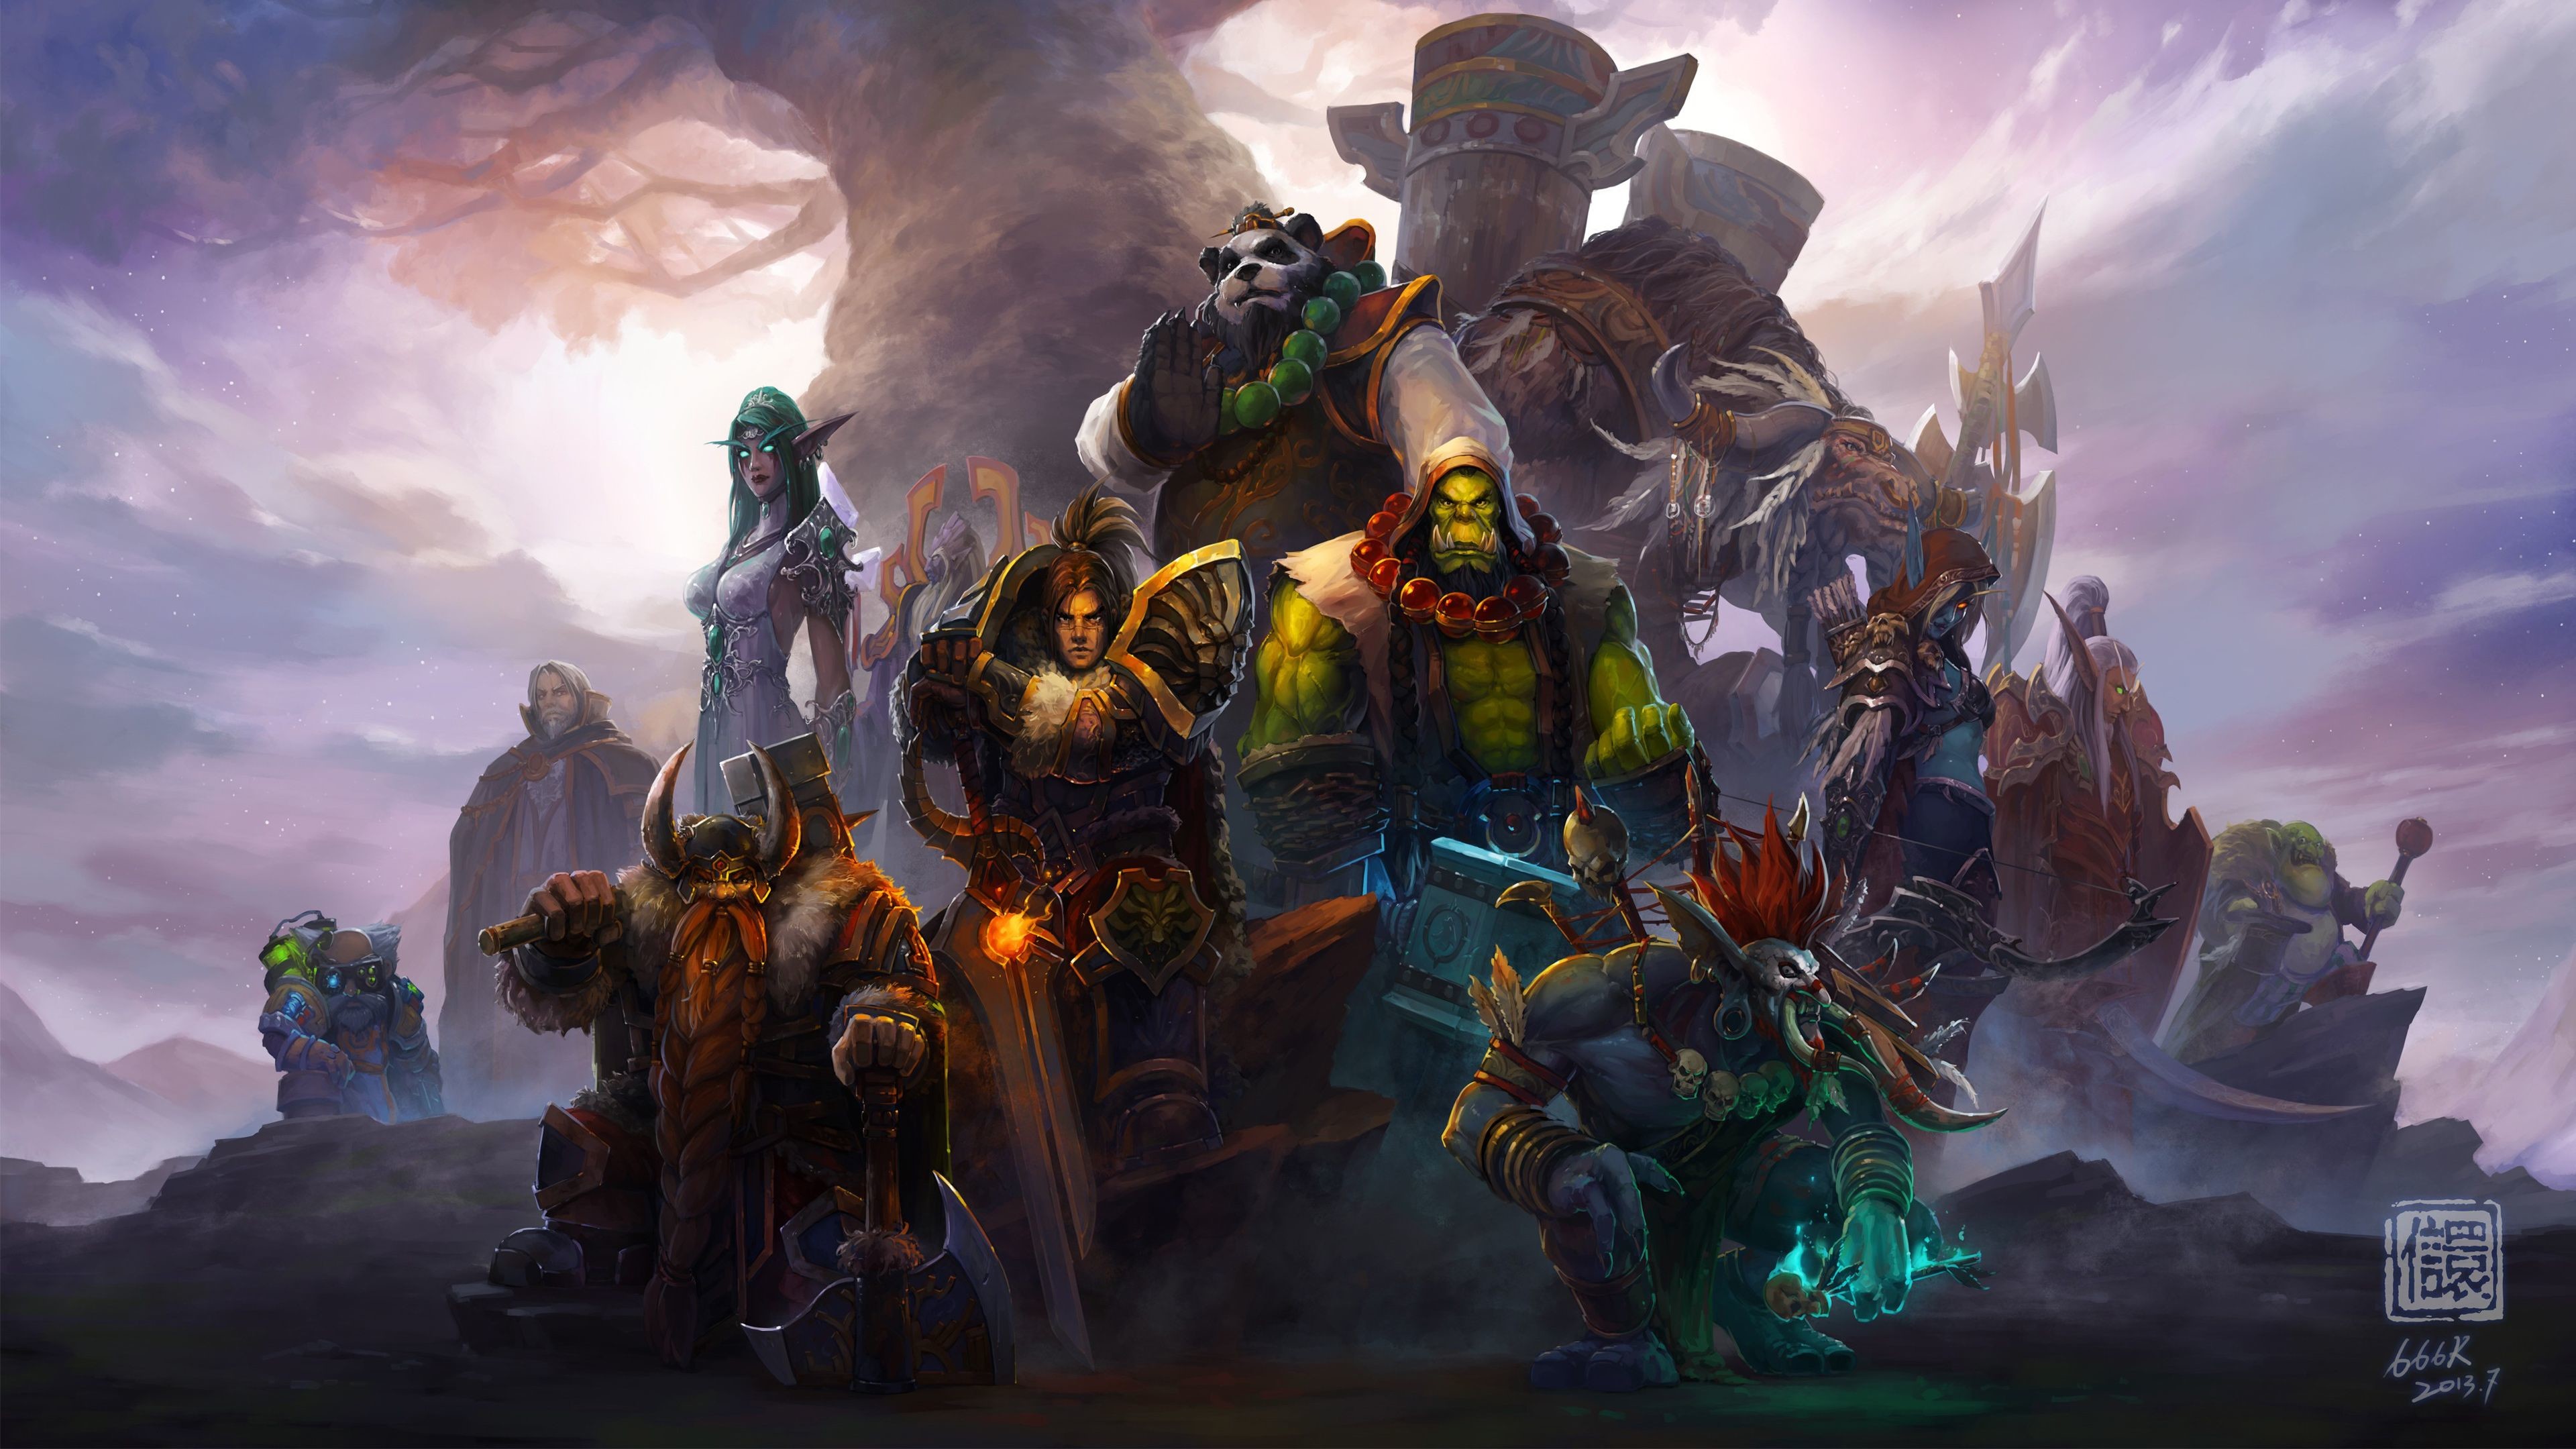 3840x2160  World of Warcraft Characters 4K Wallpapers | HD Wallpapers | ID  #18607